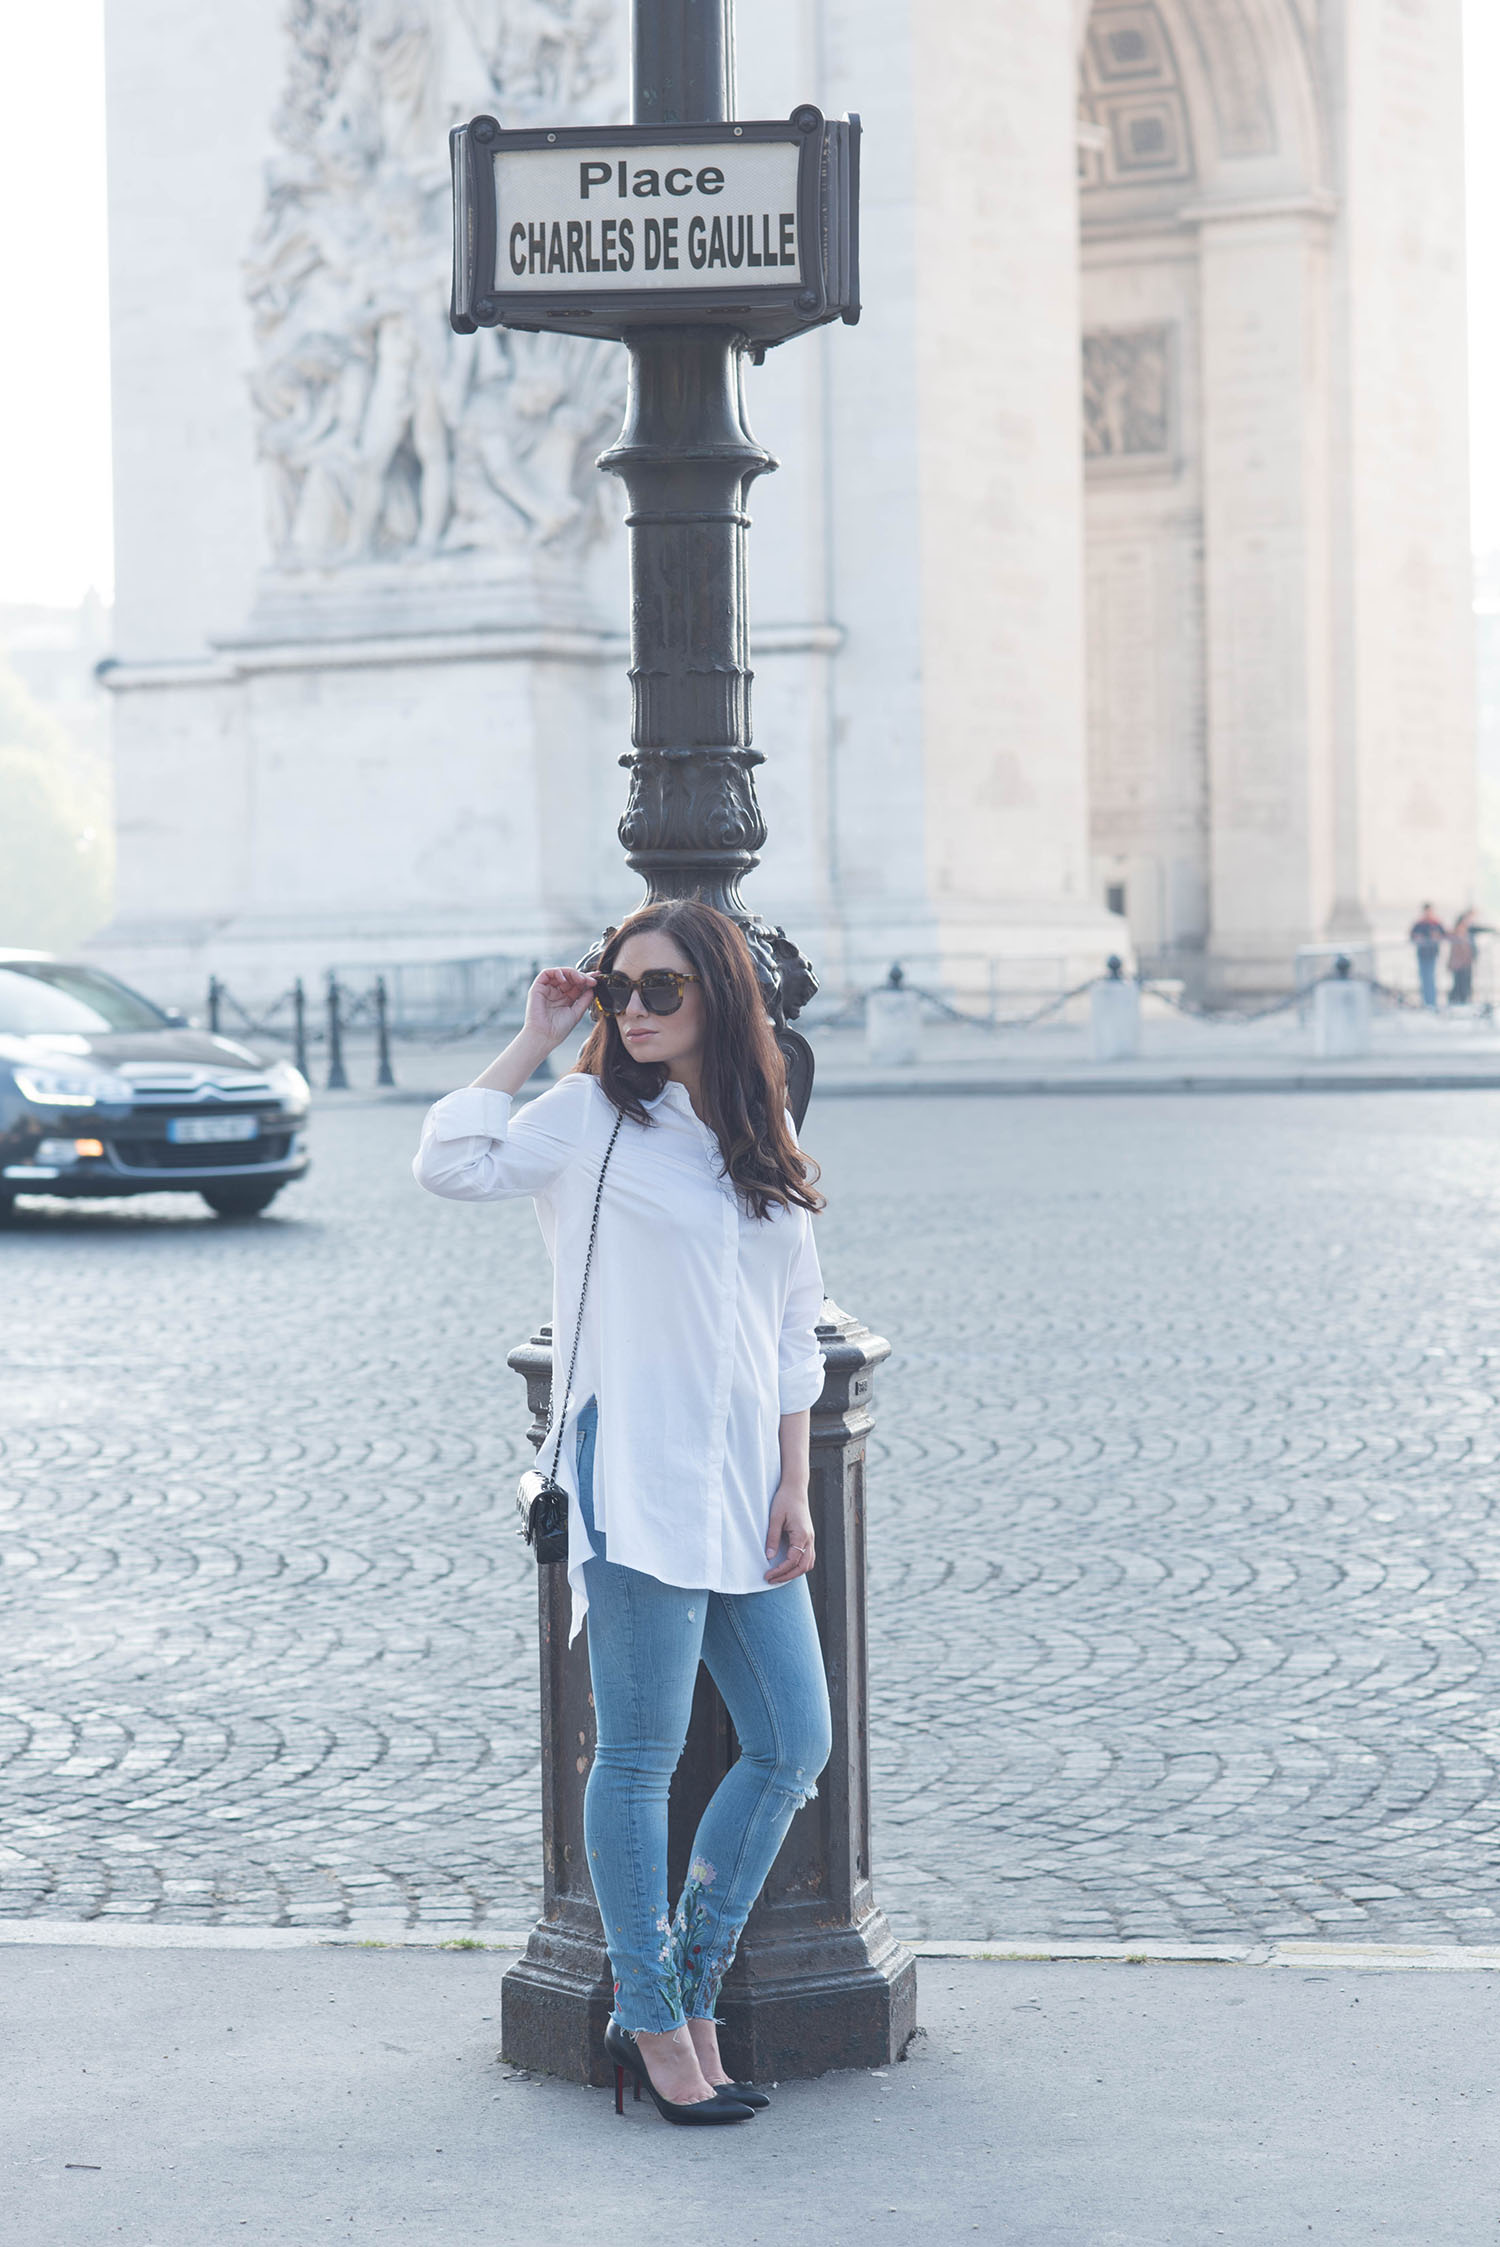 Canadian fashion blogger Cee Fardoe stands near the Arc de Triomphe in Paris wearing Zara embroidered jeans and Christian Louboutin Pigalle pumps